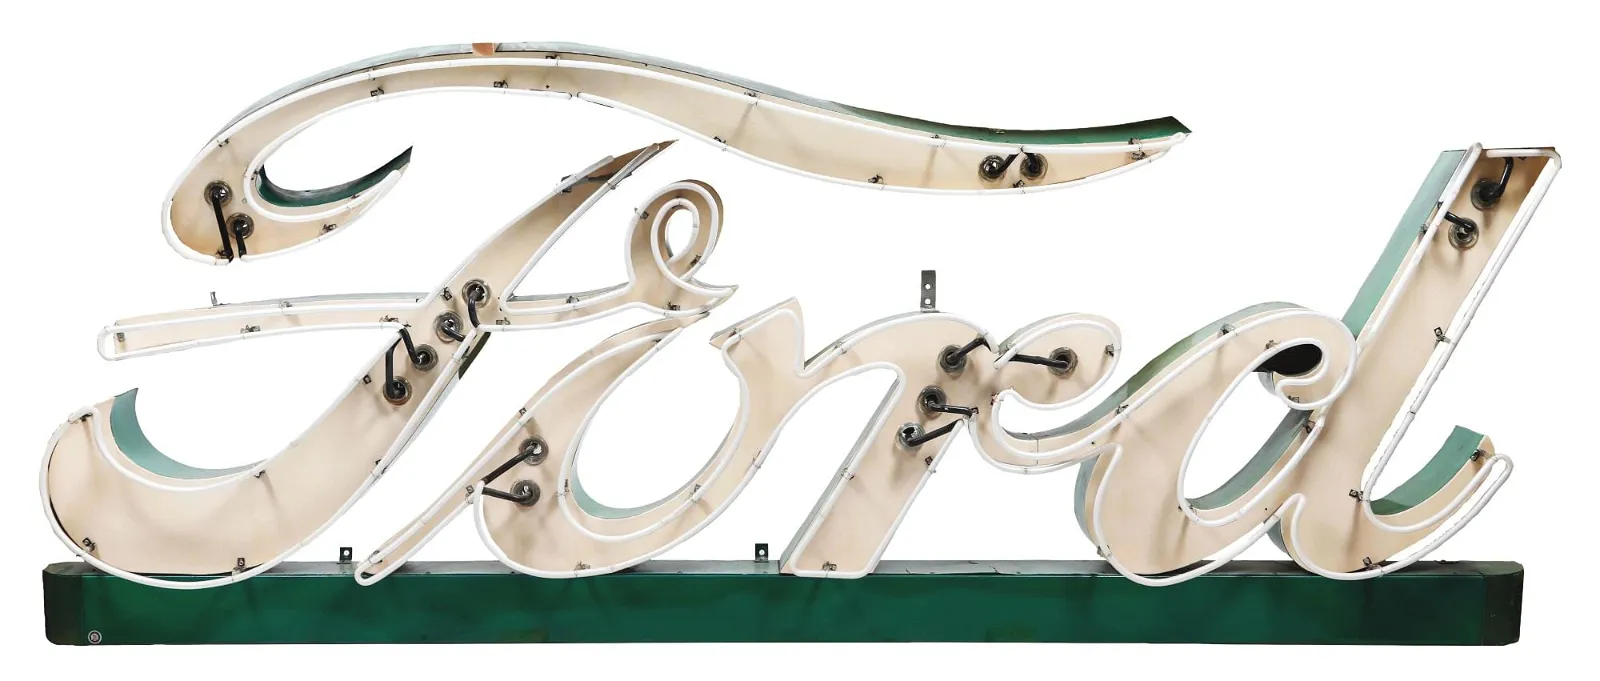 Ford script neon sign, which sold for $41,820 at Morphy.